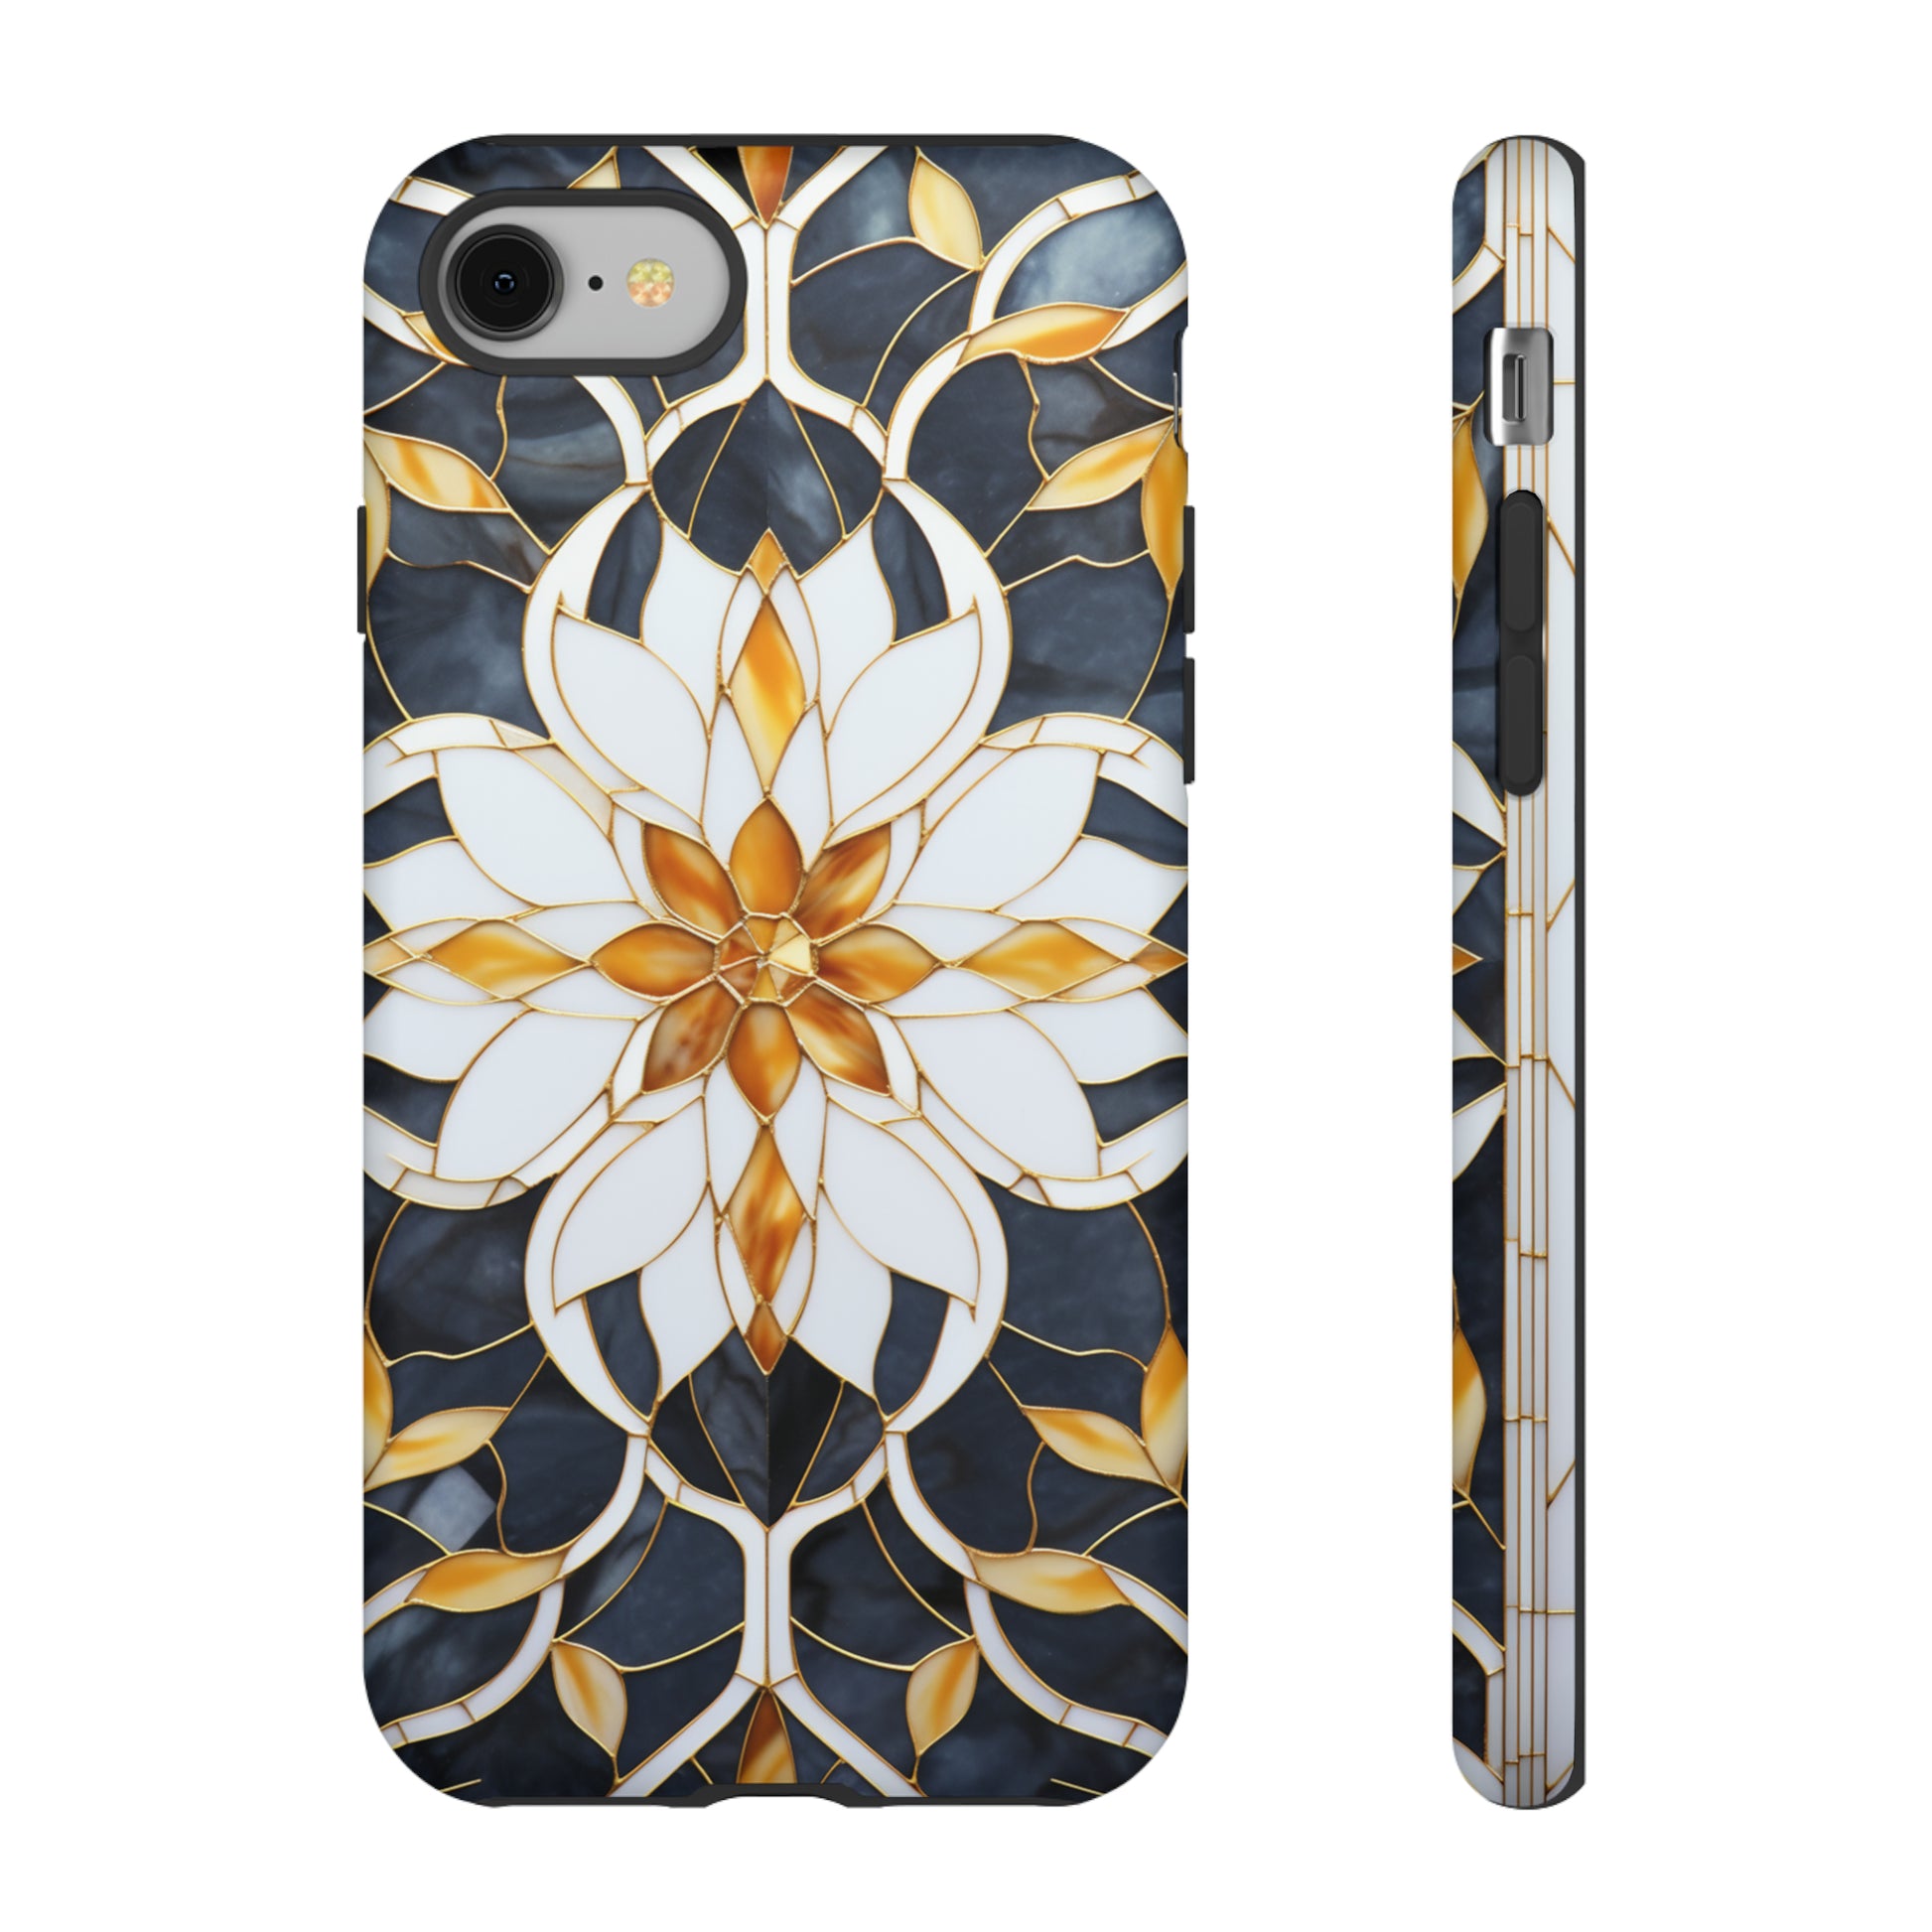 Art Deco-inspired phone cover for iPhone 11 Pro Max